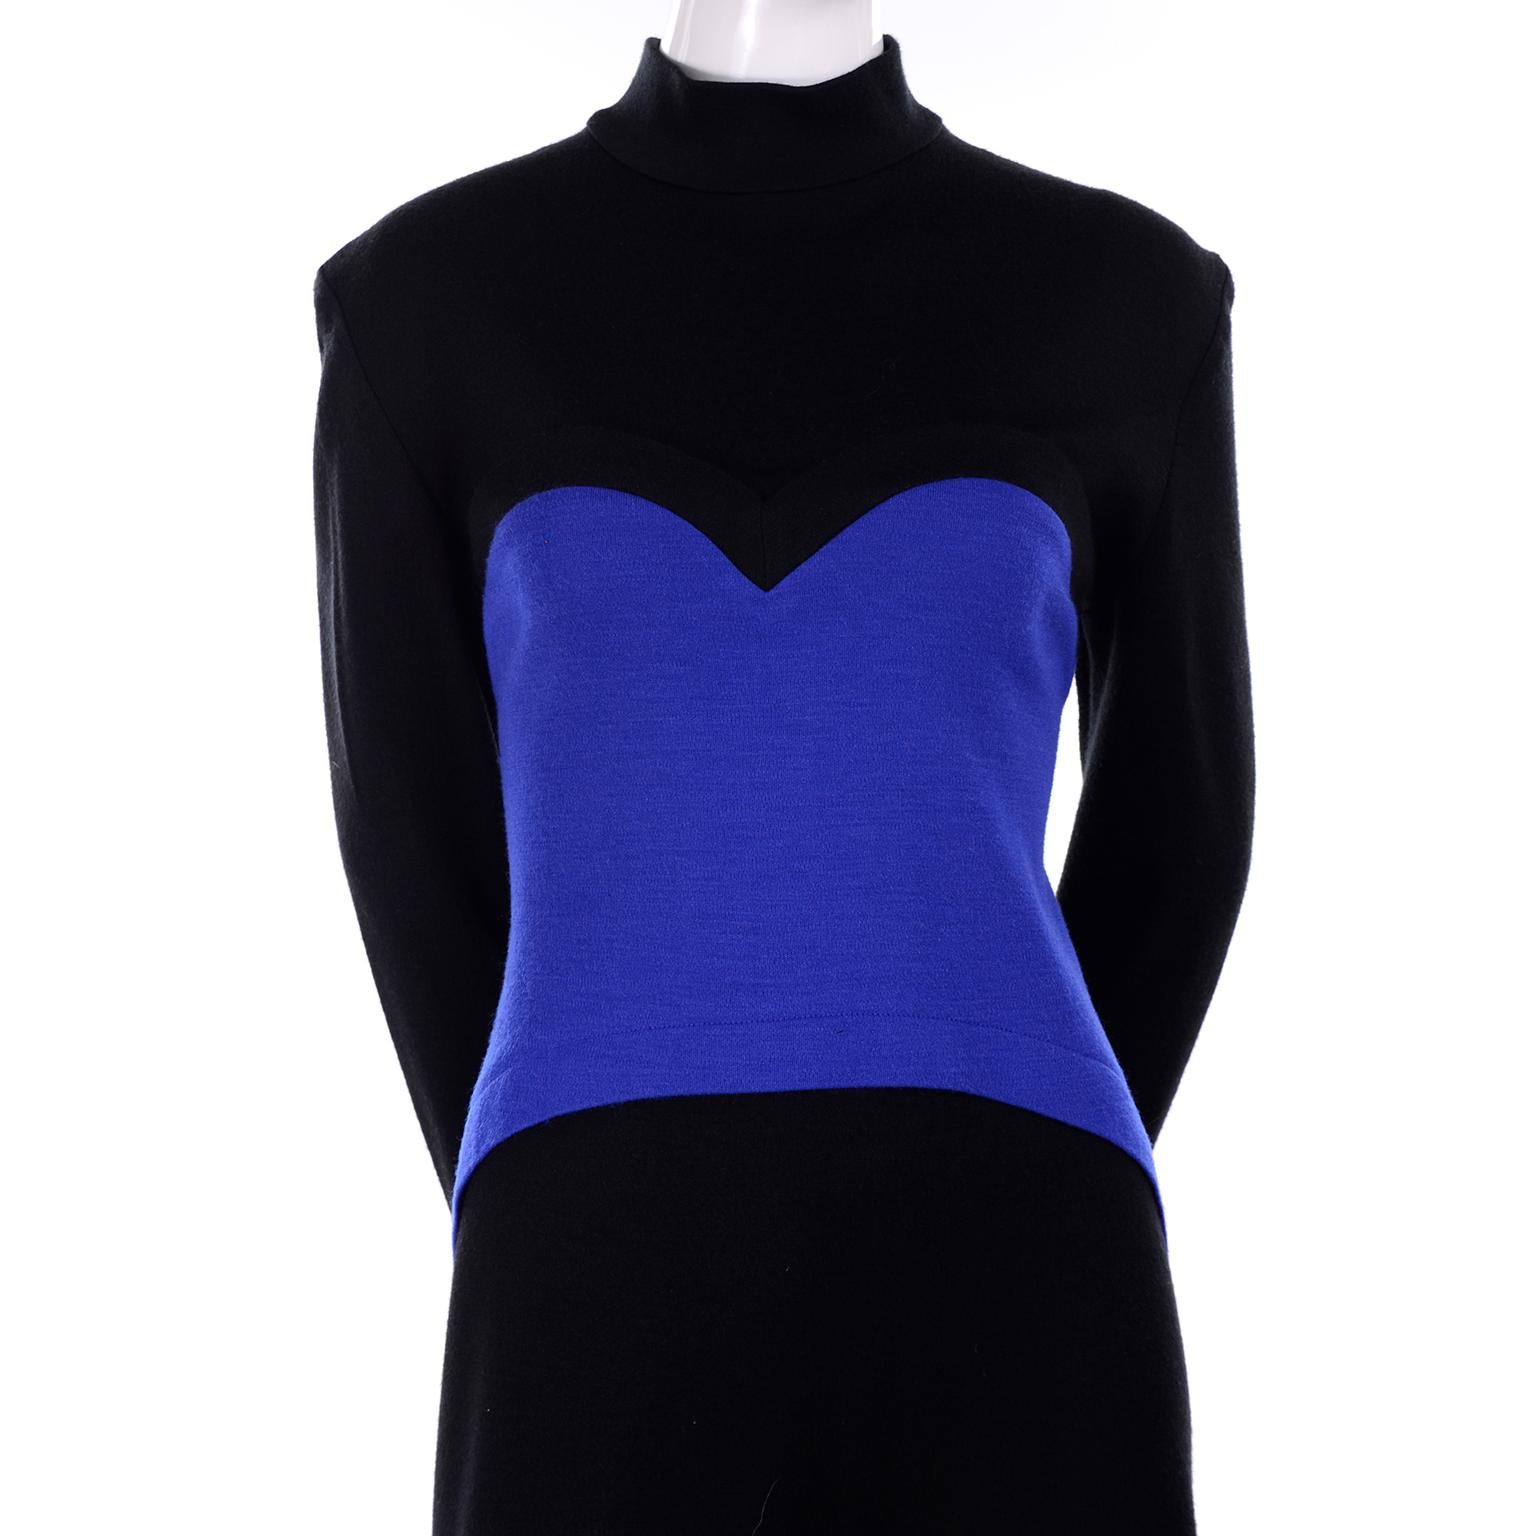 Women's 1980s Patrick Kelly Vintage Dress in Blue and Black Color Block Heart Wool Knit